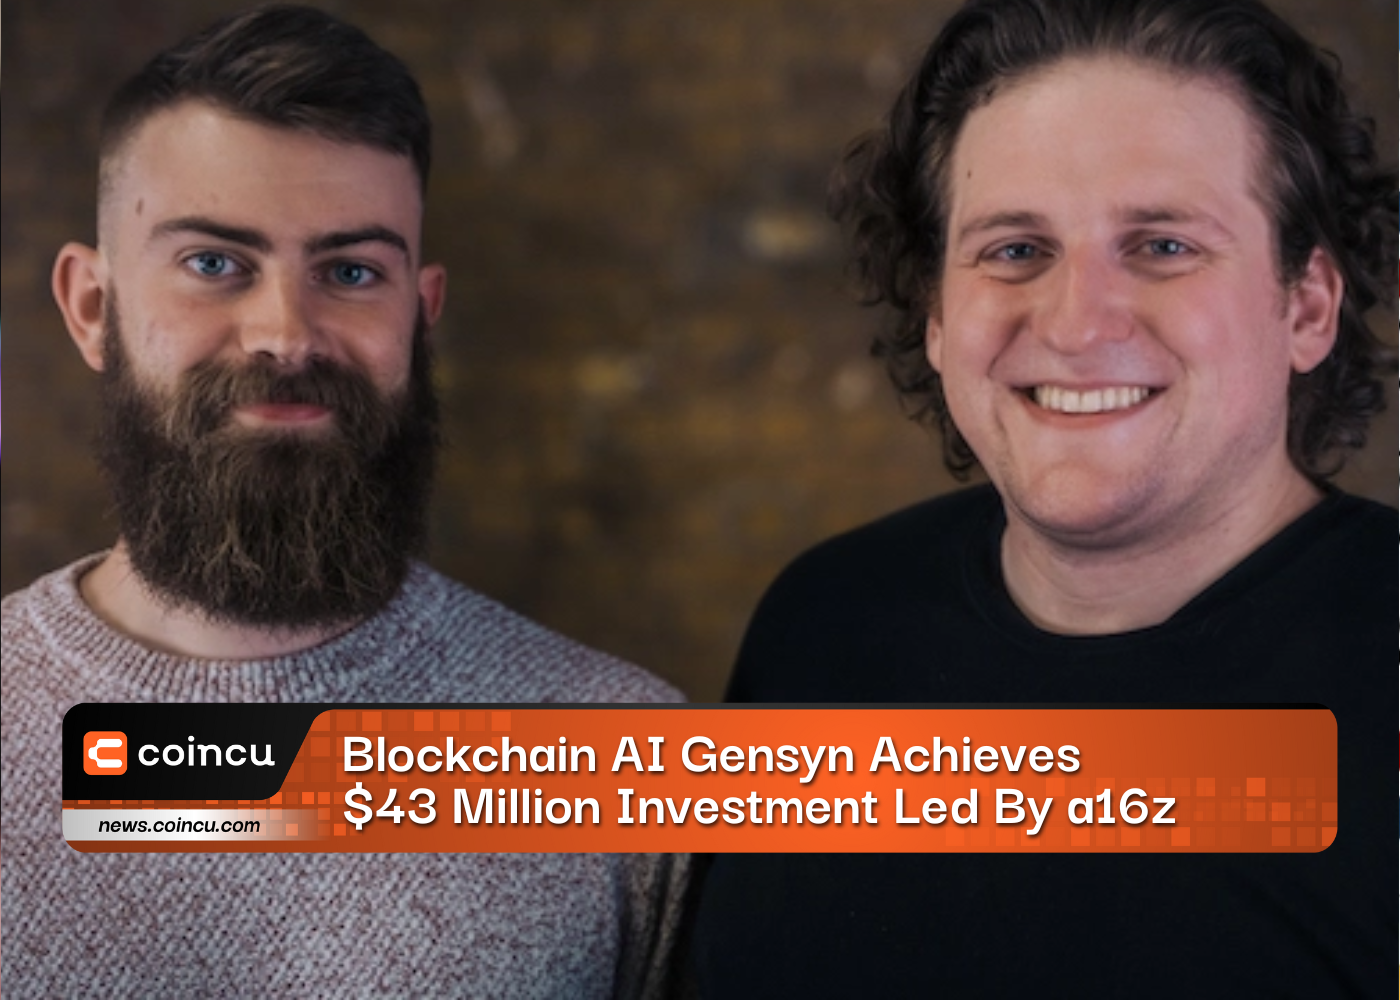 Blockchain AI Gensyn Achieves $43 Million Investment Led By a16z